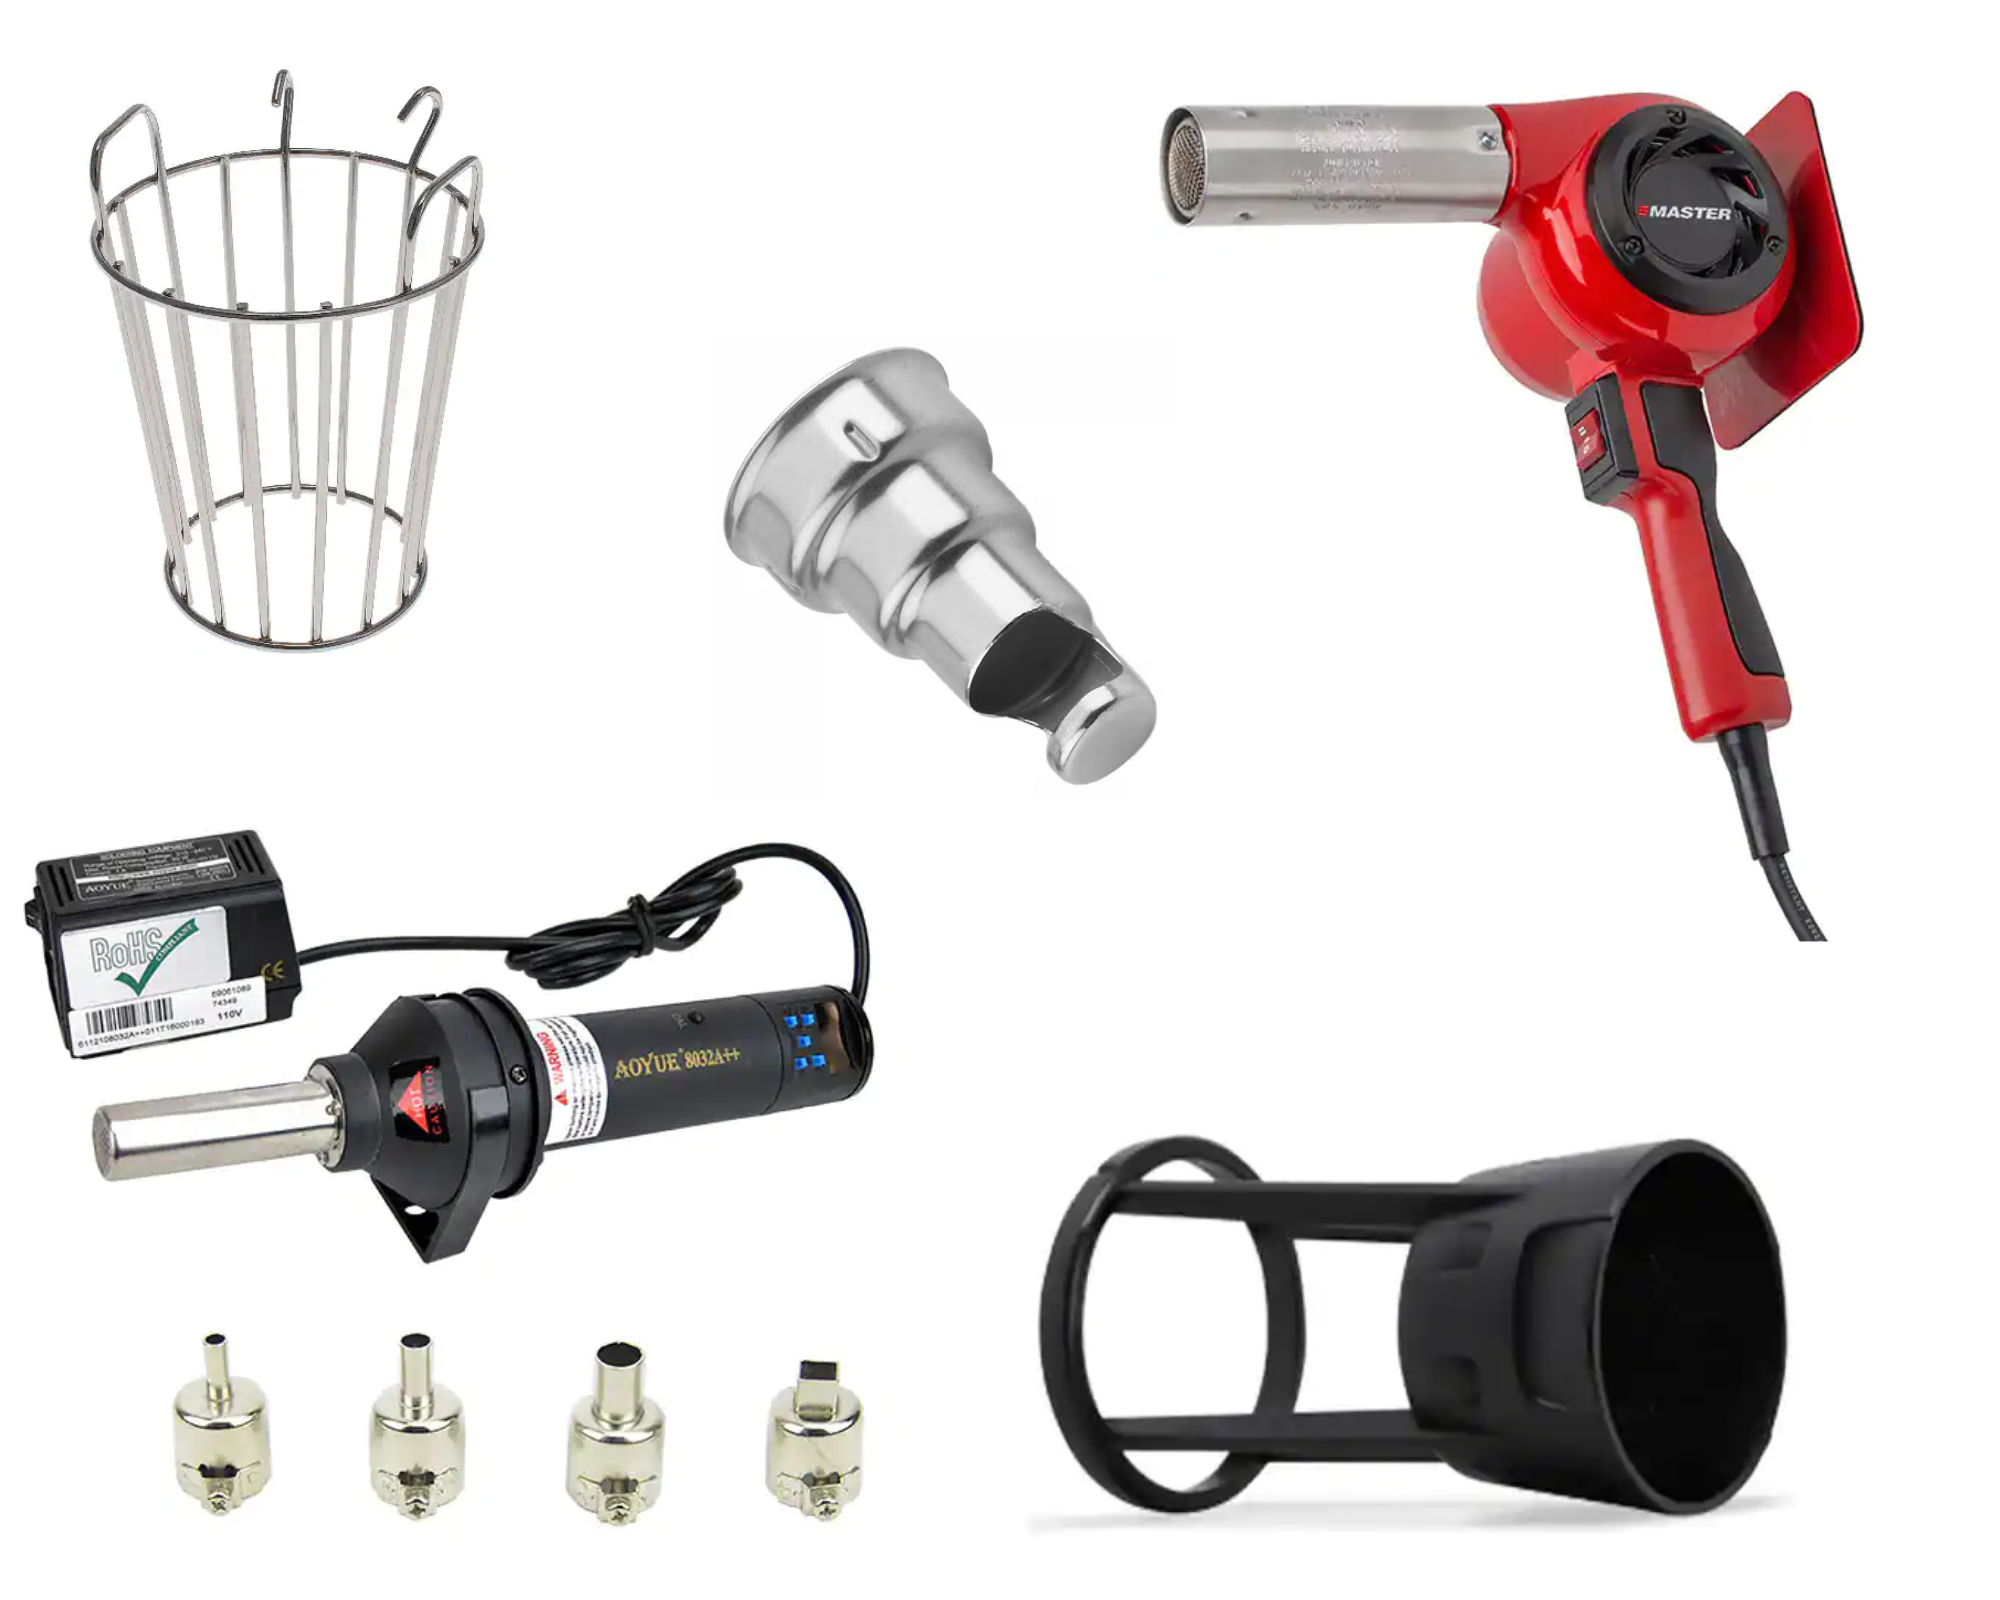 Heat Guns, Torches and Accessories